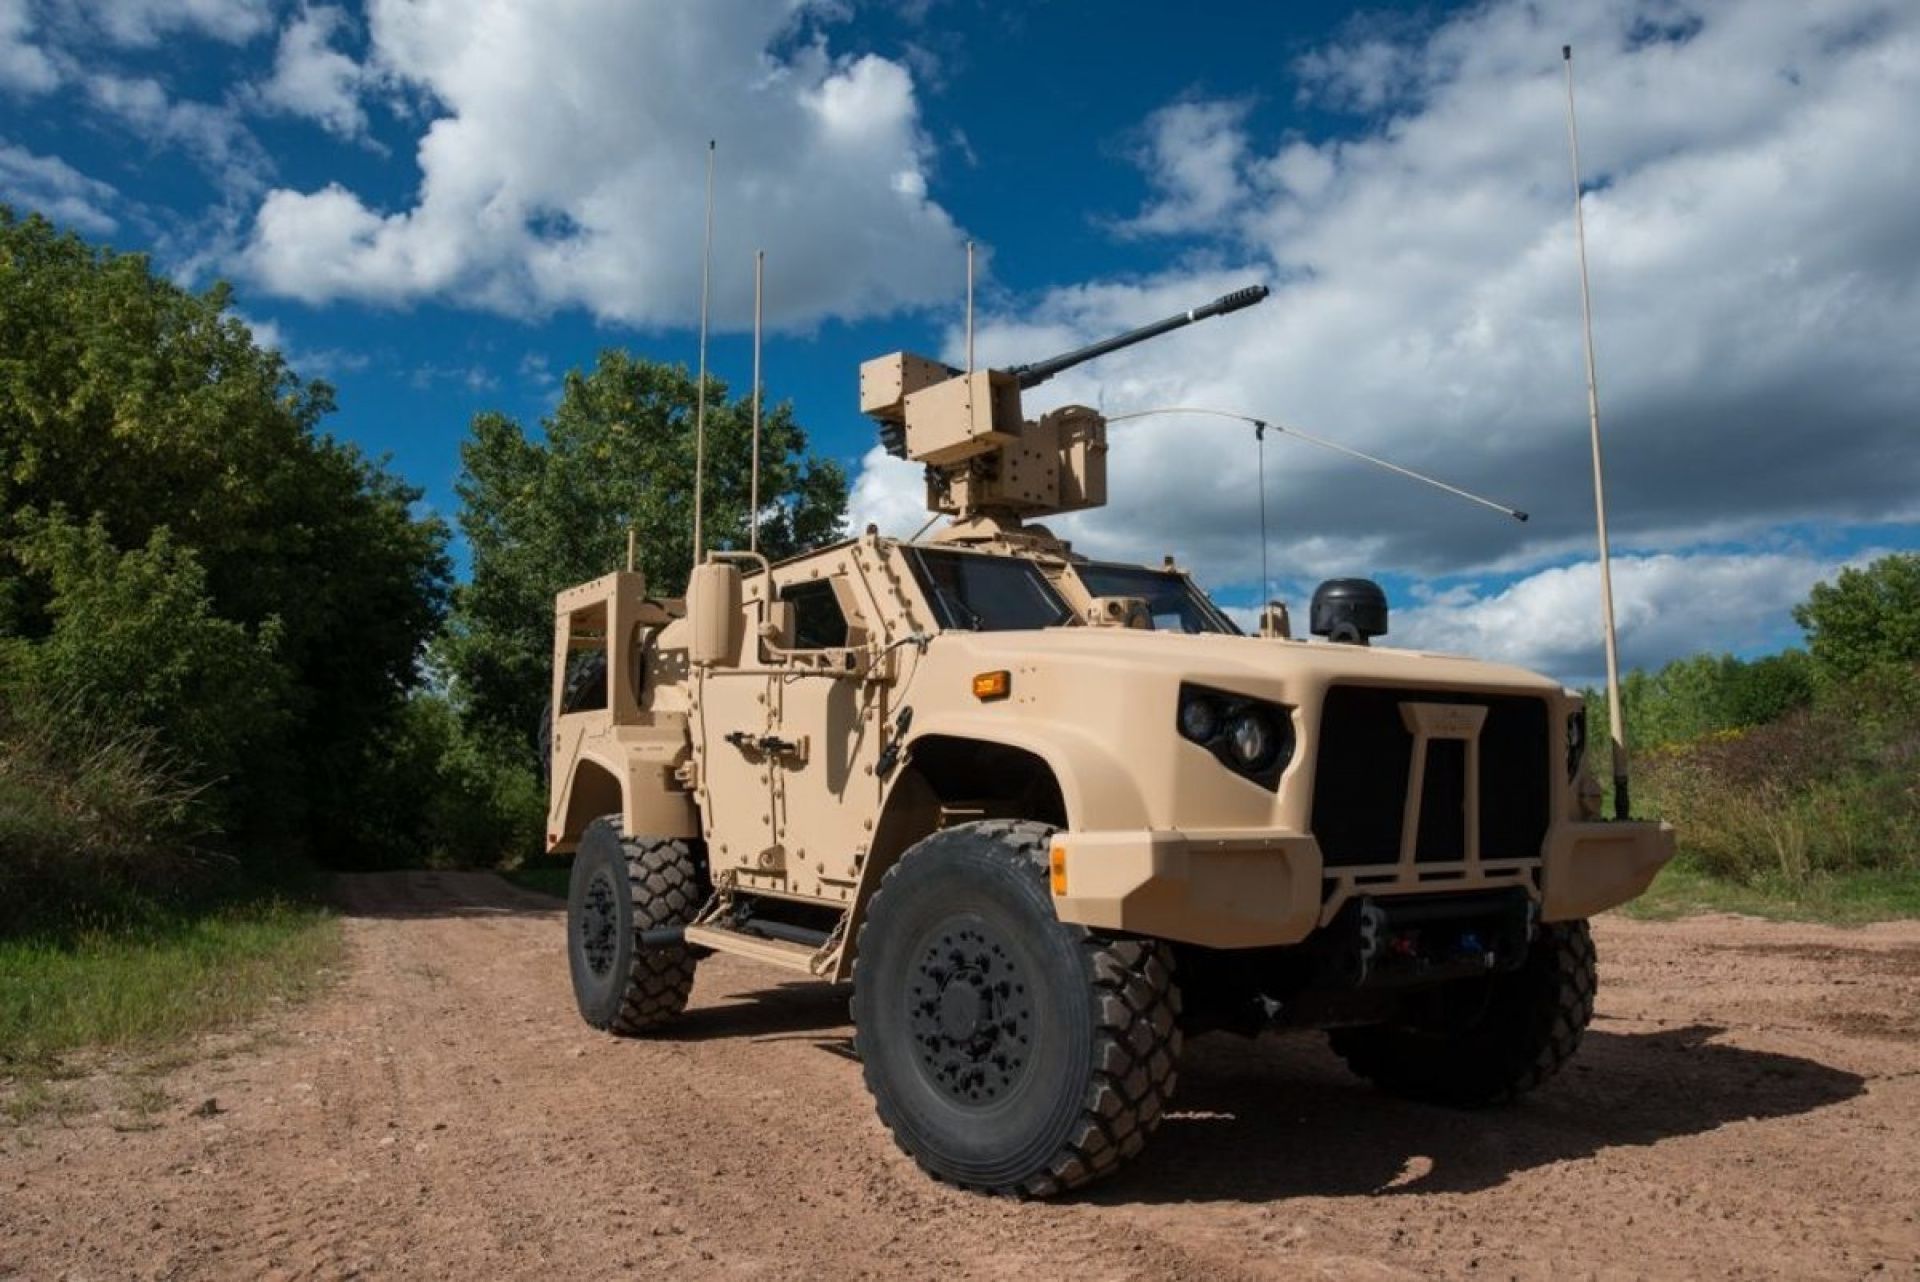 Slovakia invests $190 Million in 160 Oshkosh JLTVs to strengthen Armed Forces